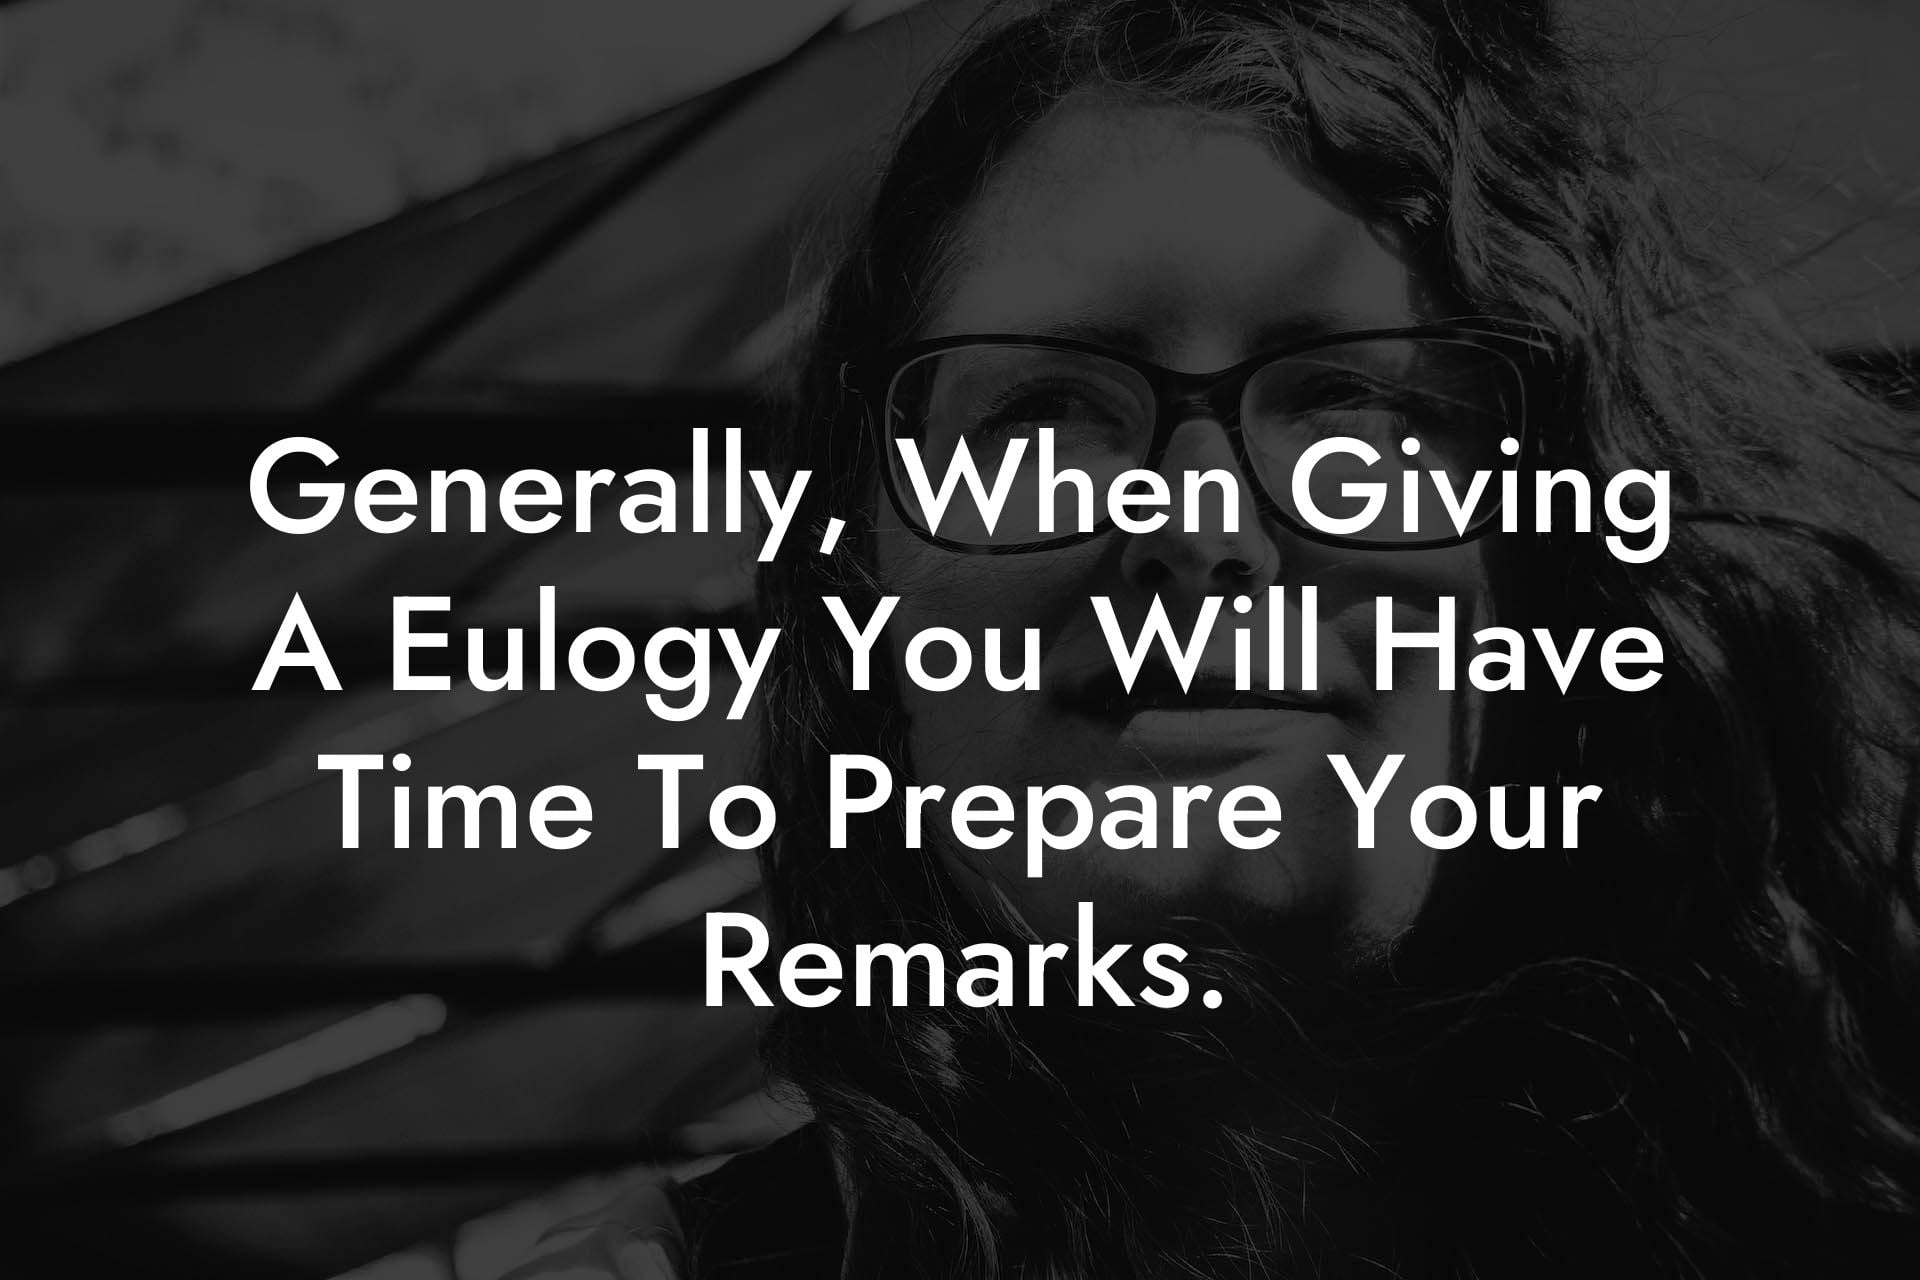 Generally, When Giving A Eulogy You Will Have Time To Prepare Your Remarks.